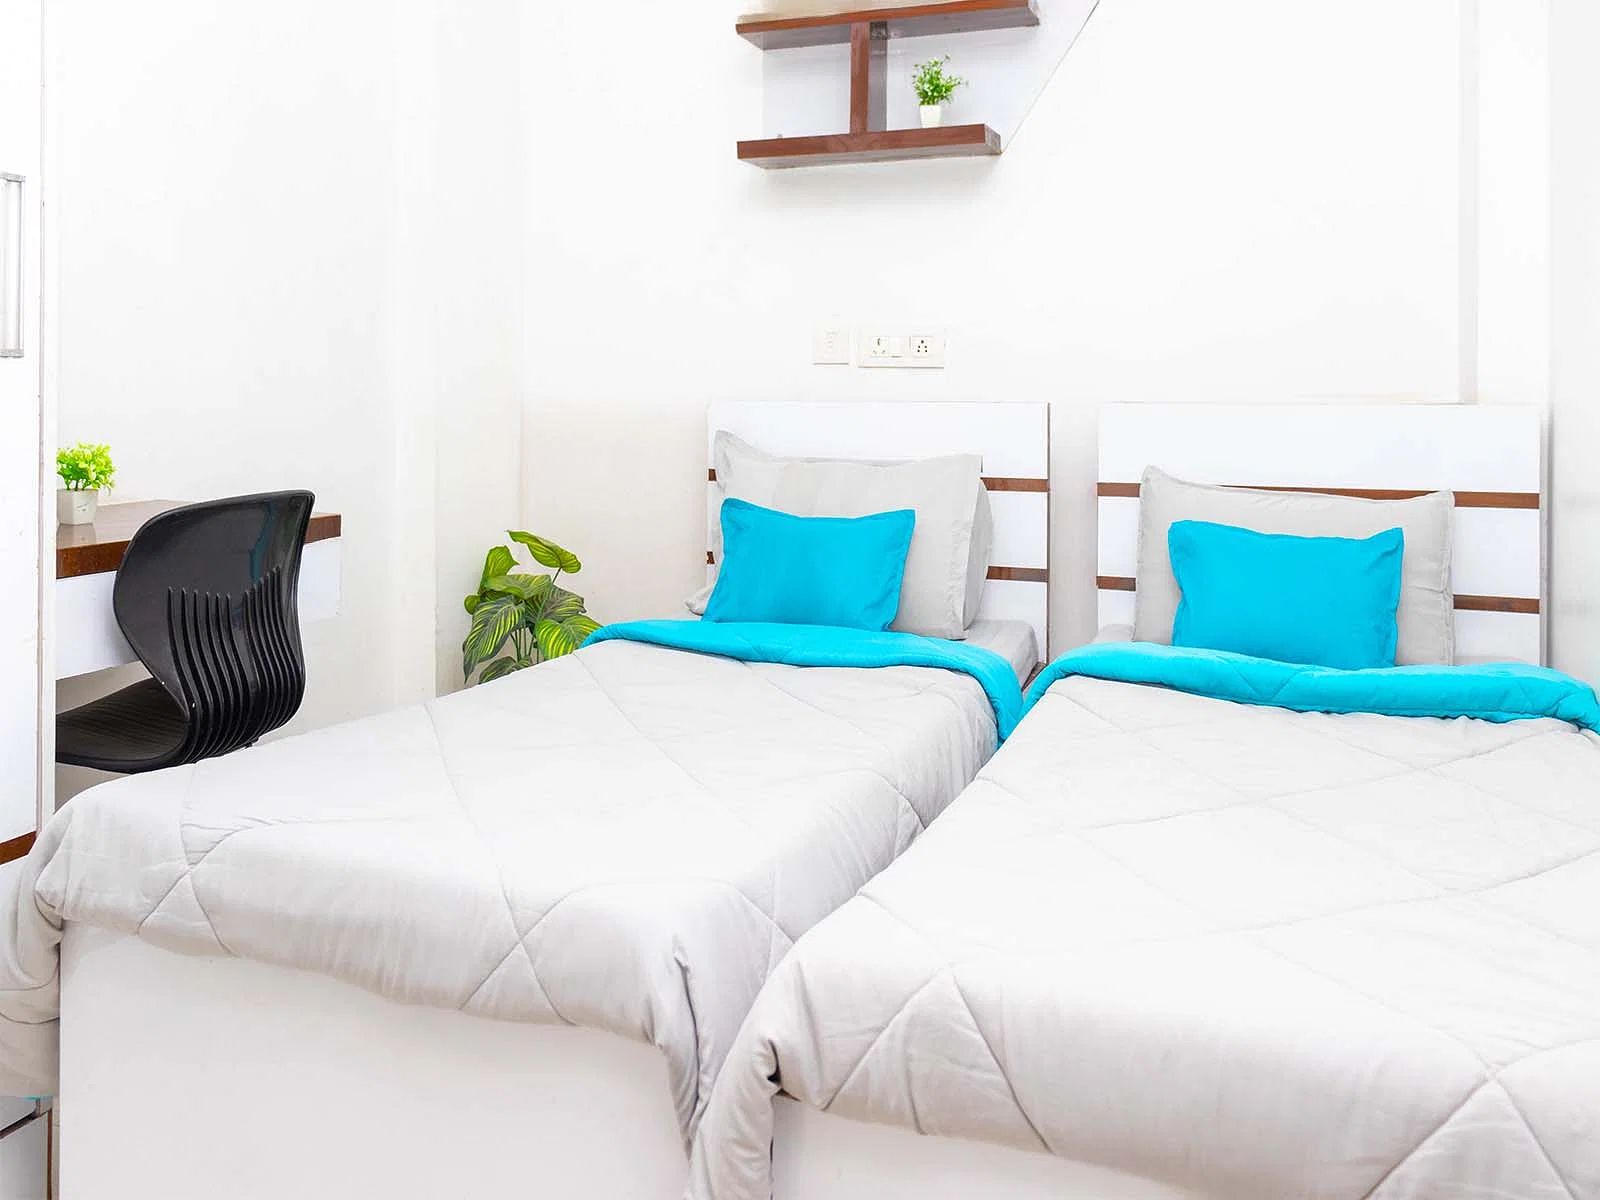 budget-friendly PGs and hostels for men and women with single rooms with daily hopusekeeping-Zolo Astrix